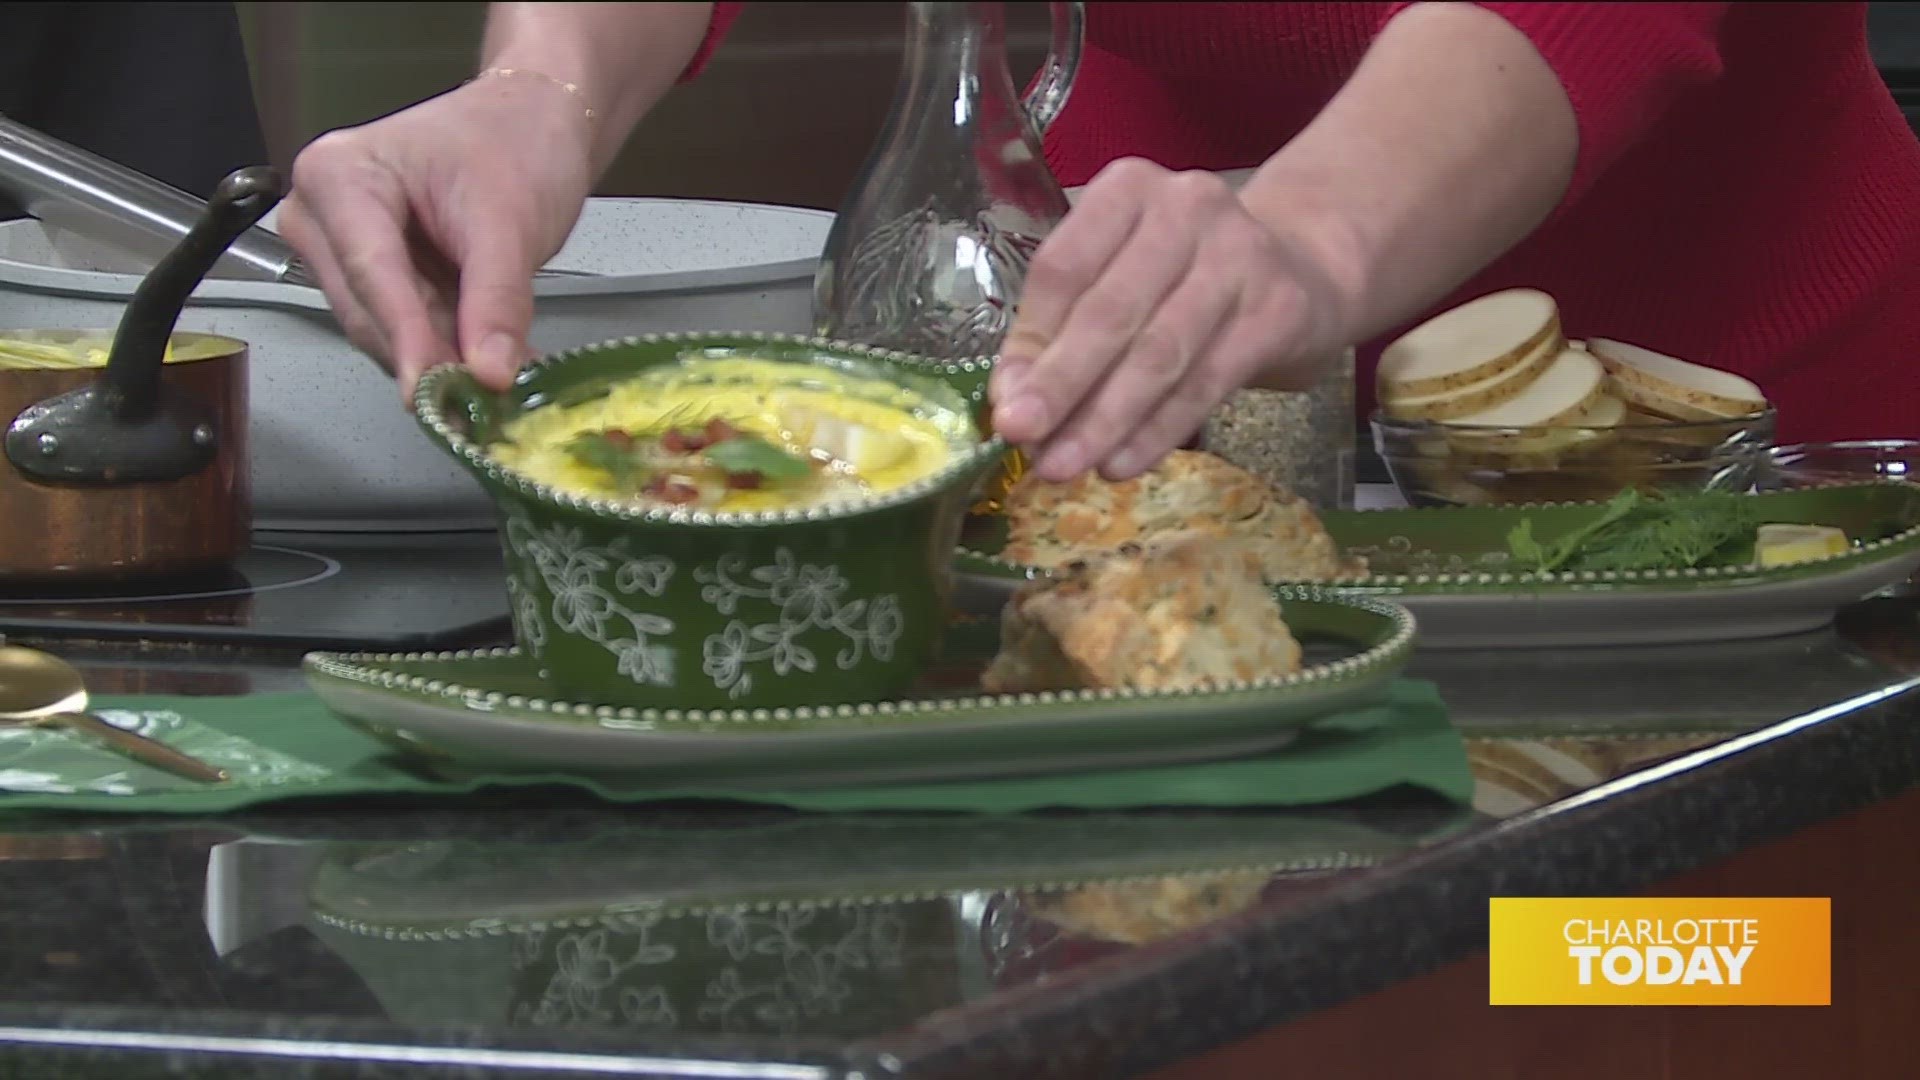 Chef Tillie shares a delicious recipe for St. Patrick's Day